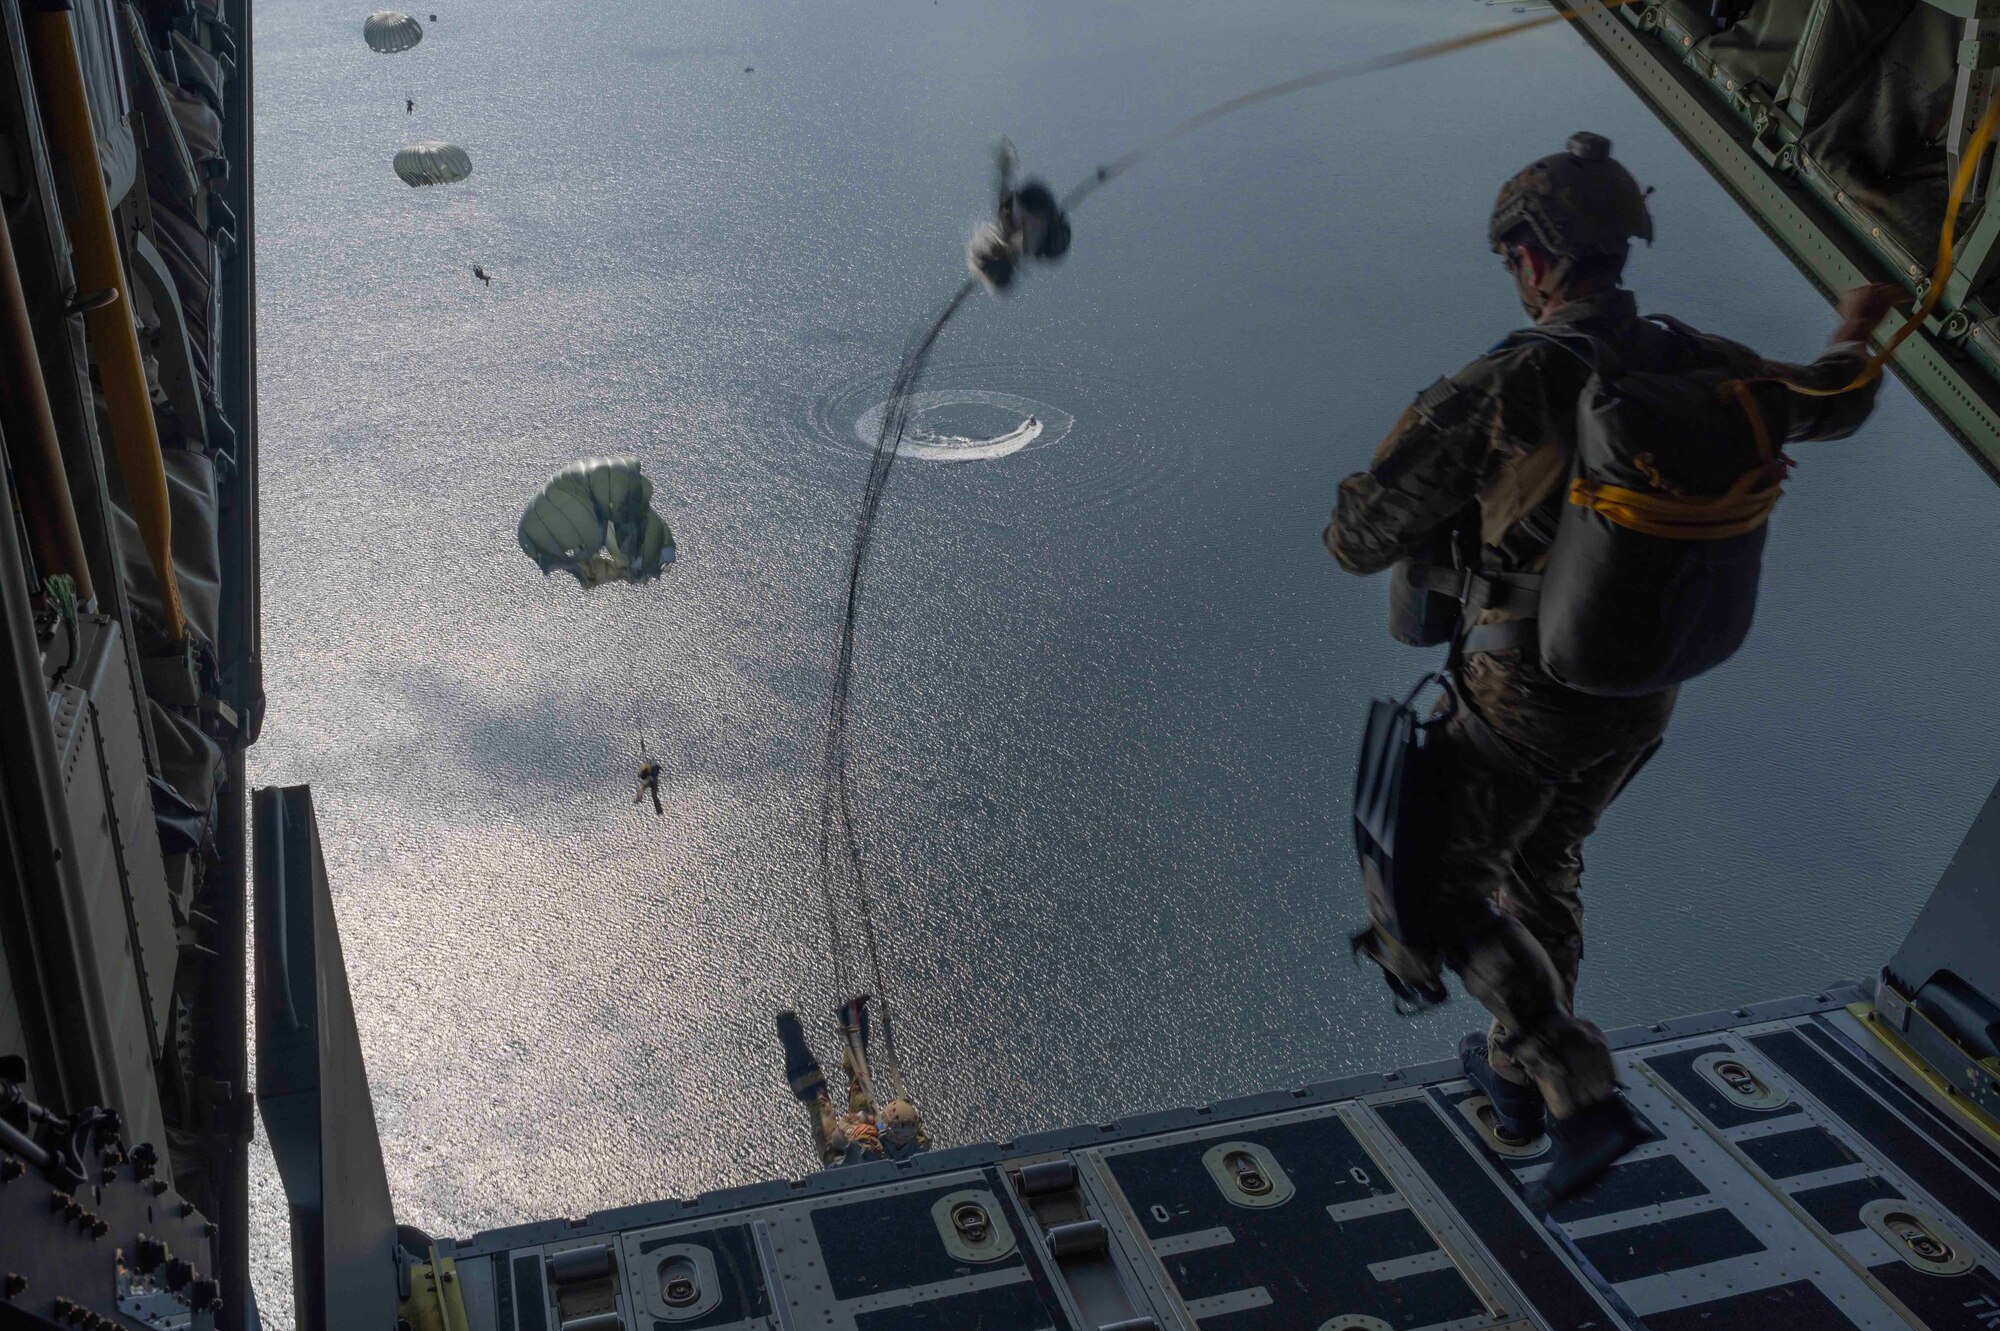 U.S. Air Force Special Tactics operators, assigned to the 21st Special Operations Wing, conduct static-line jump training at Hurlburt Field, Florida, April 26, 2023. Emerald Warrior is the largest joint special operations exercise involving U.S. Special Operations Command forces training to respond to various threats across the spectrum of conflict. (U.S. Air Force photo by Tech. Sgt. Jael Laborn)